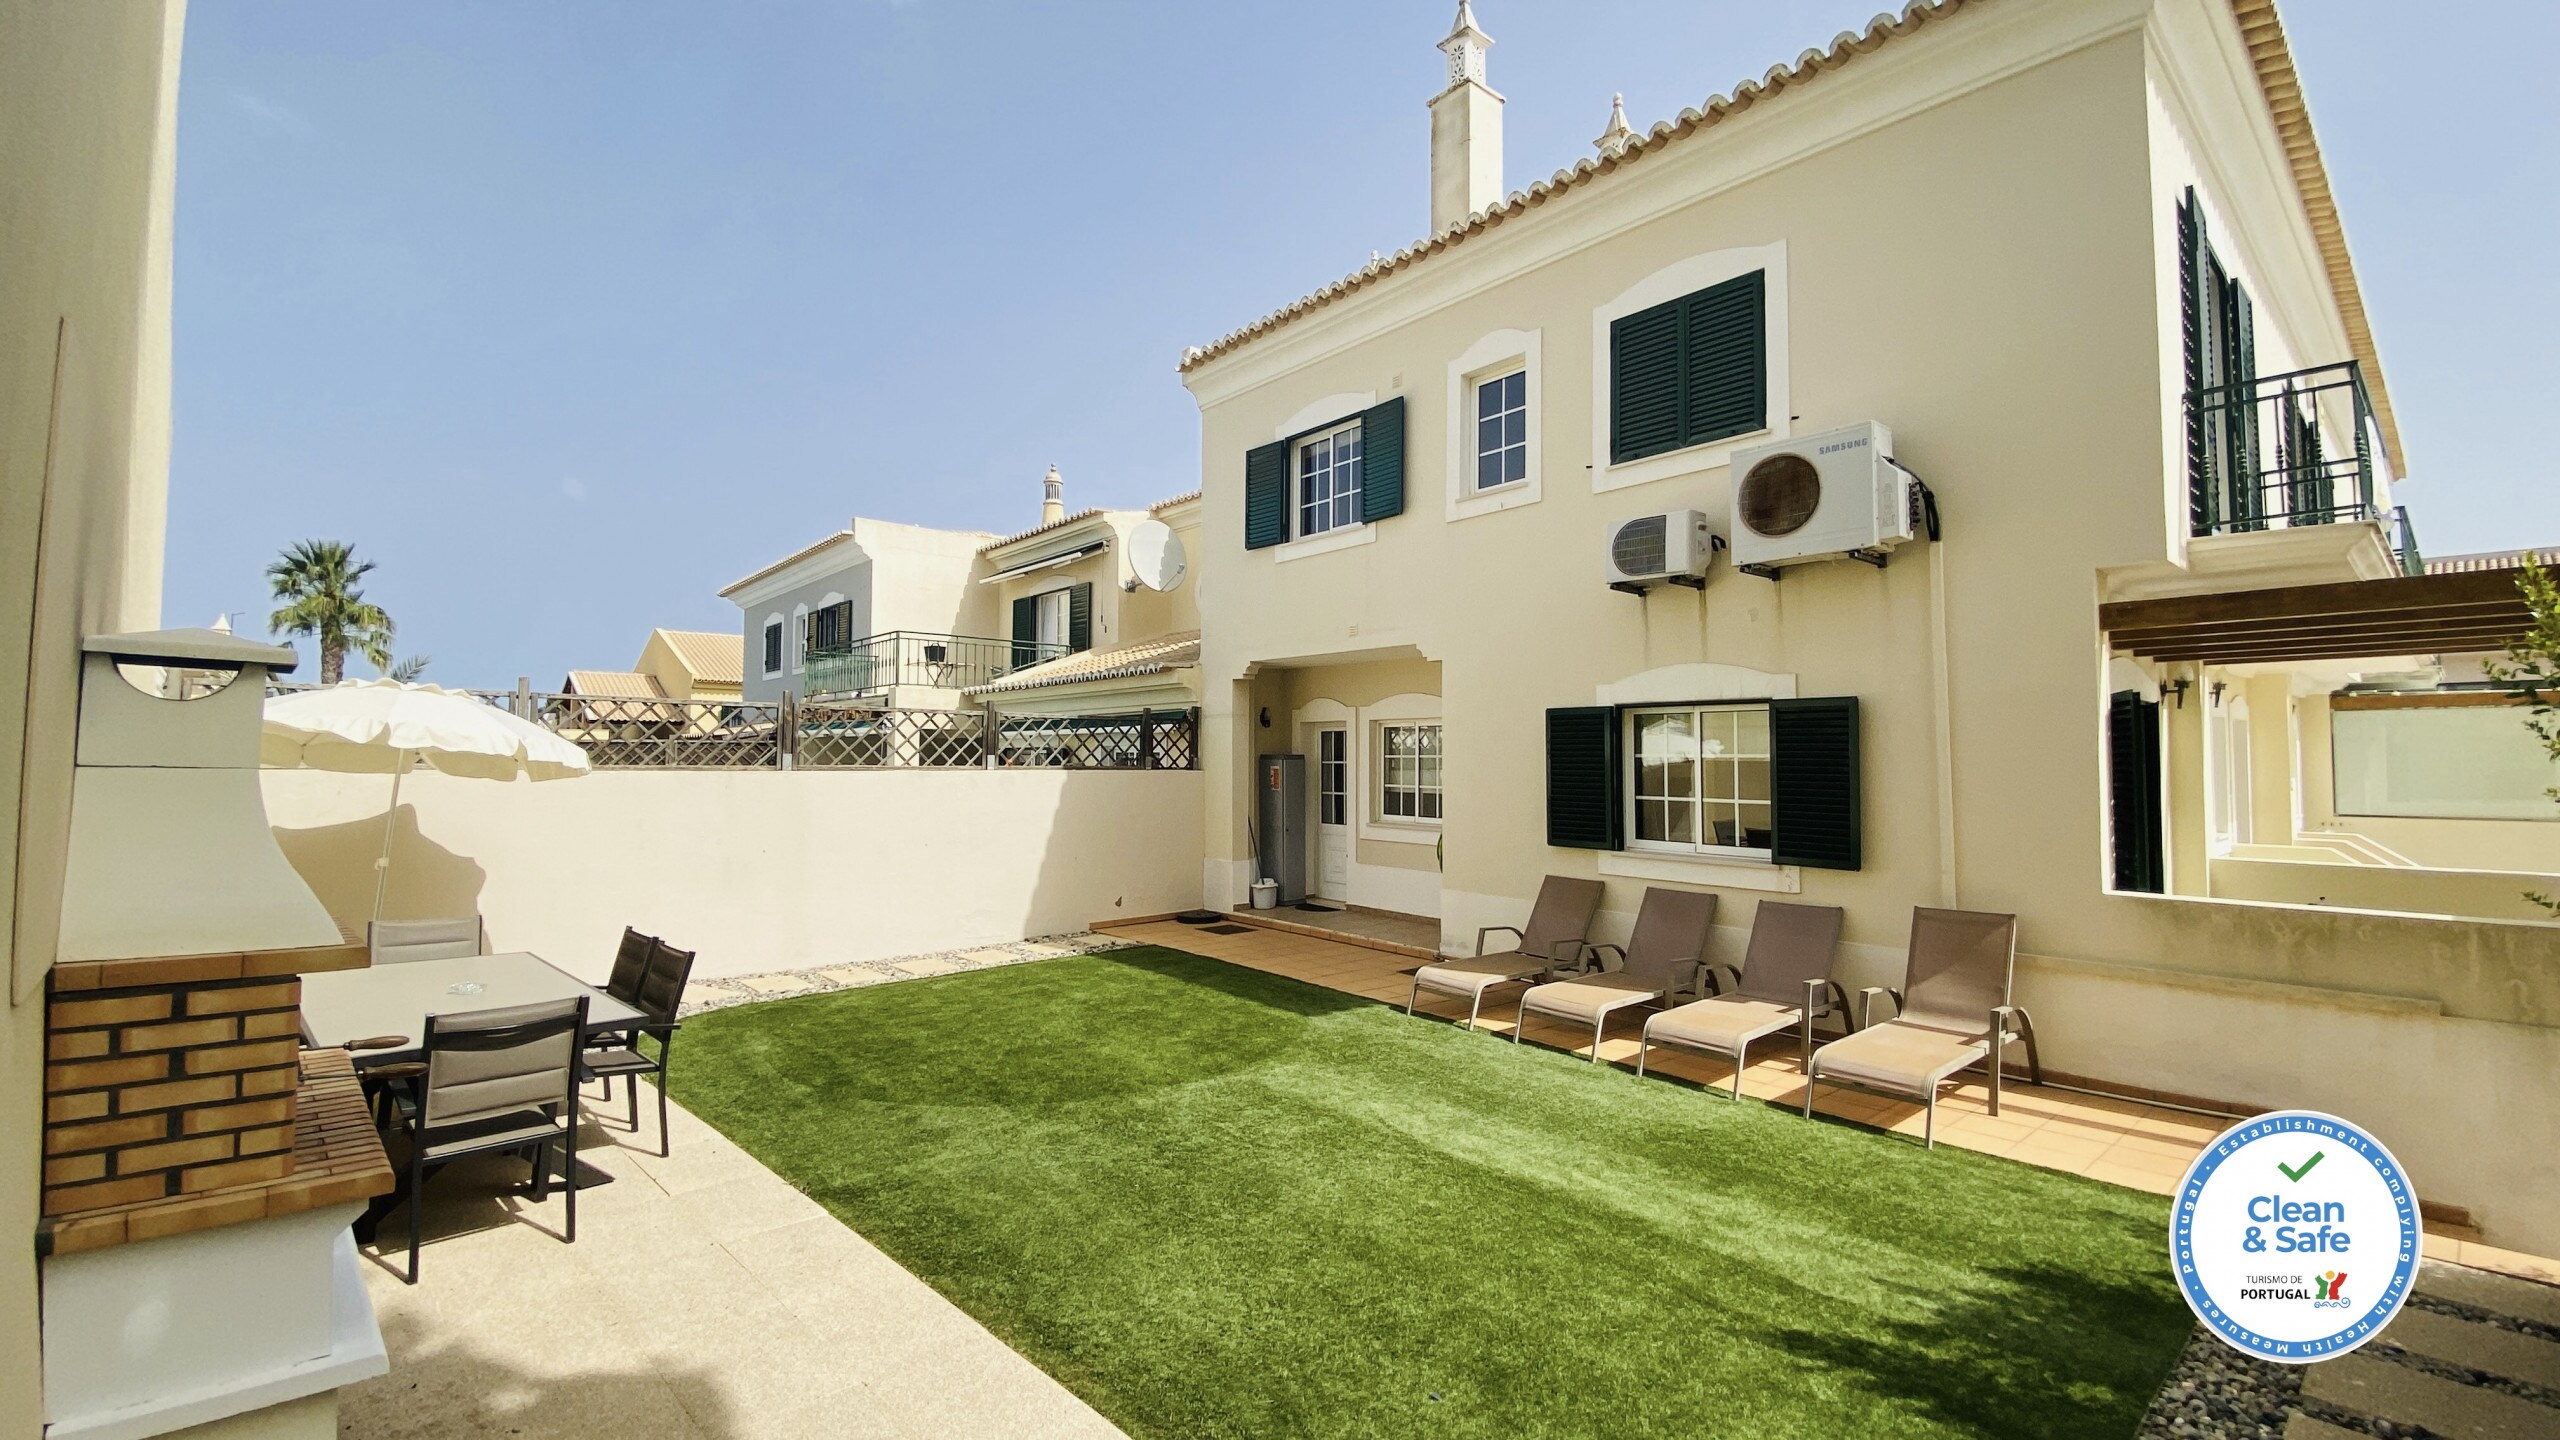 Property Image 1 - Lovely Vibrant Villa with Spacious Living Spaces